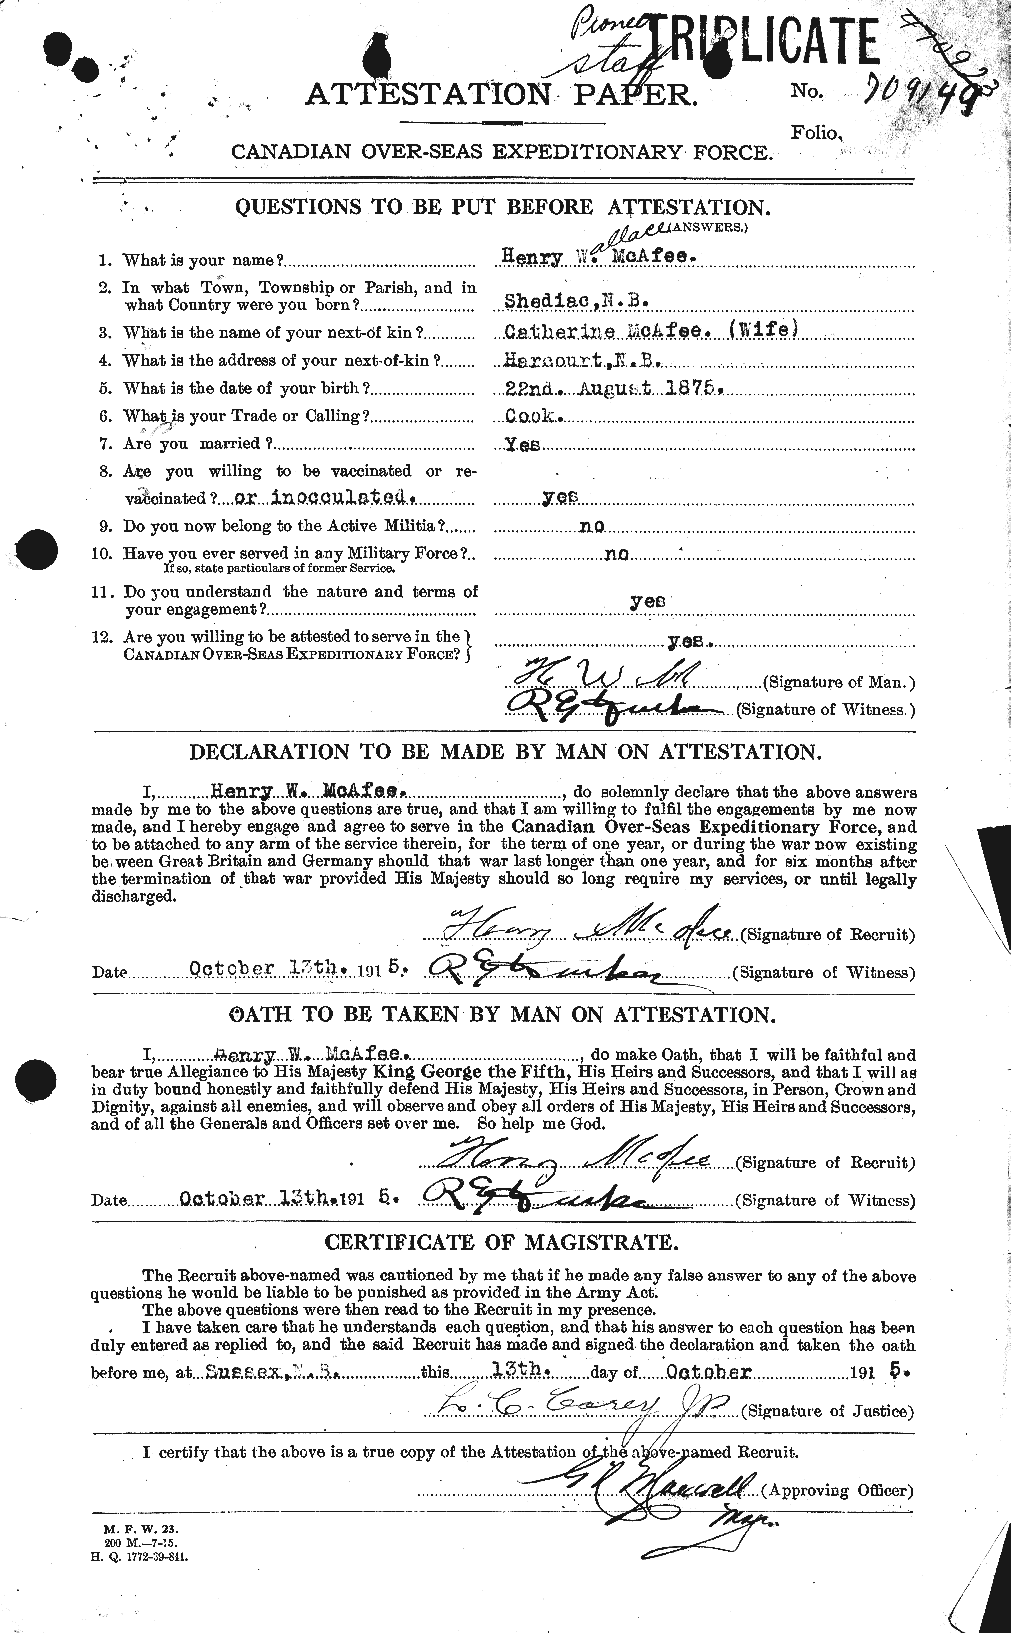 Personnel Records of the First World War - CEF 130194a